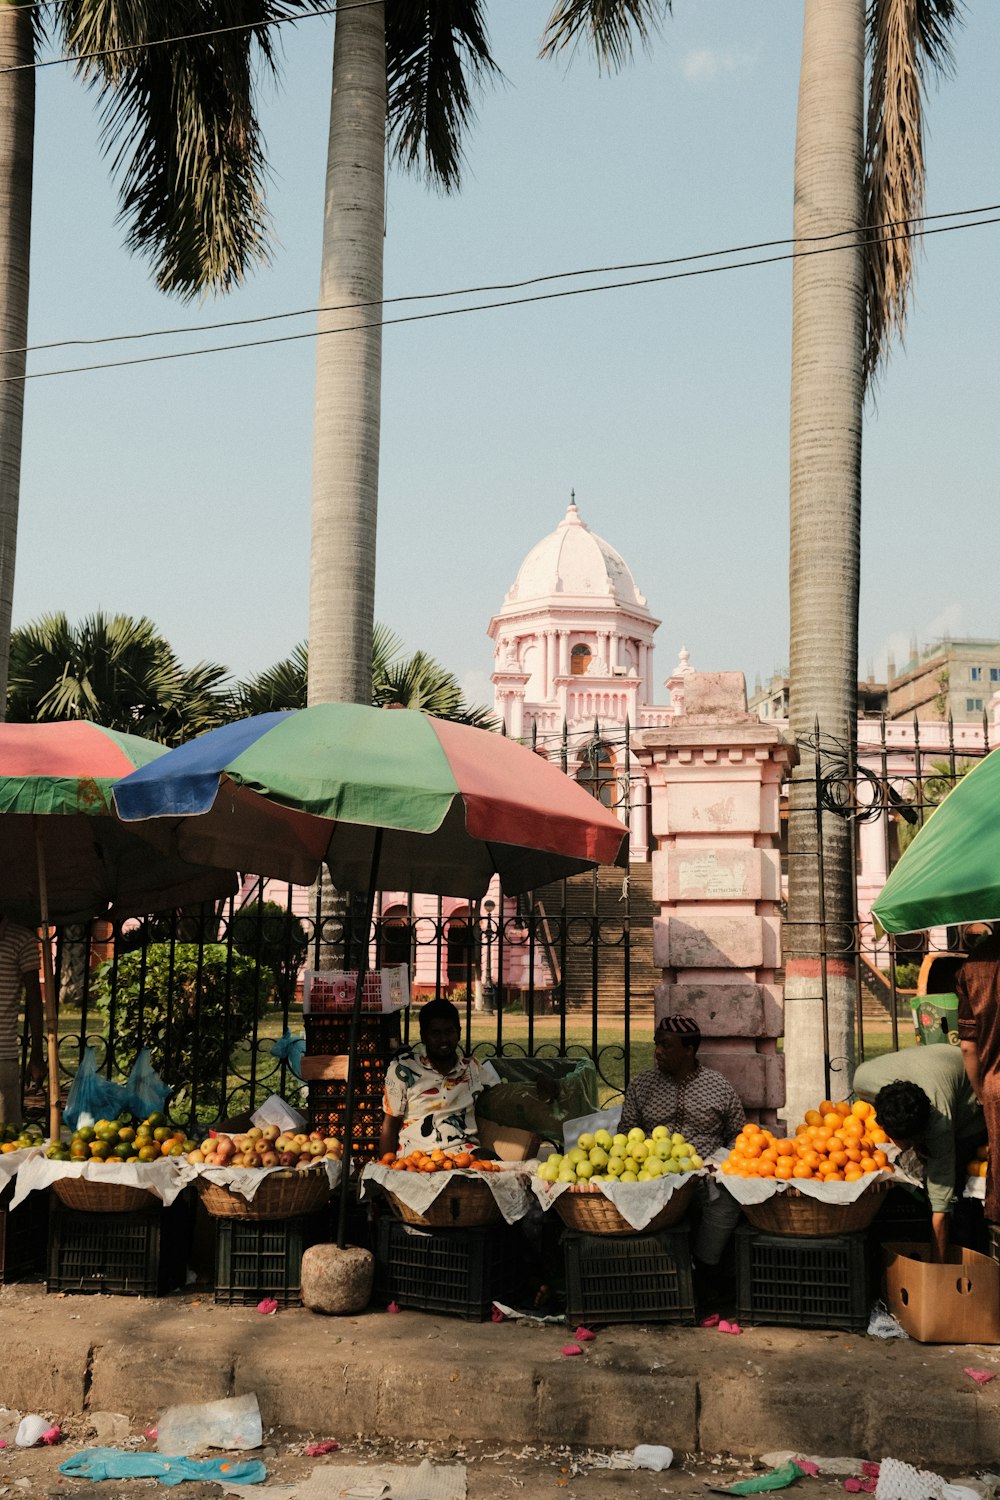 a fruit stand with a lot of fruit under umbrellas